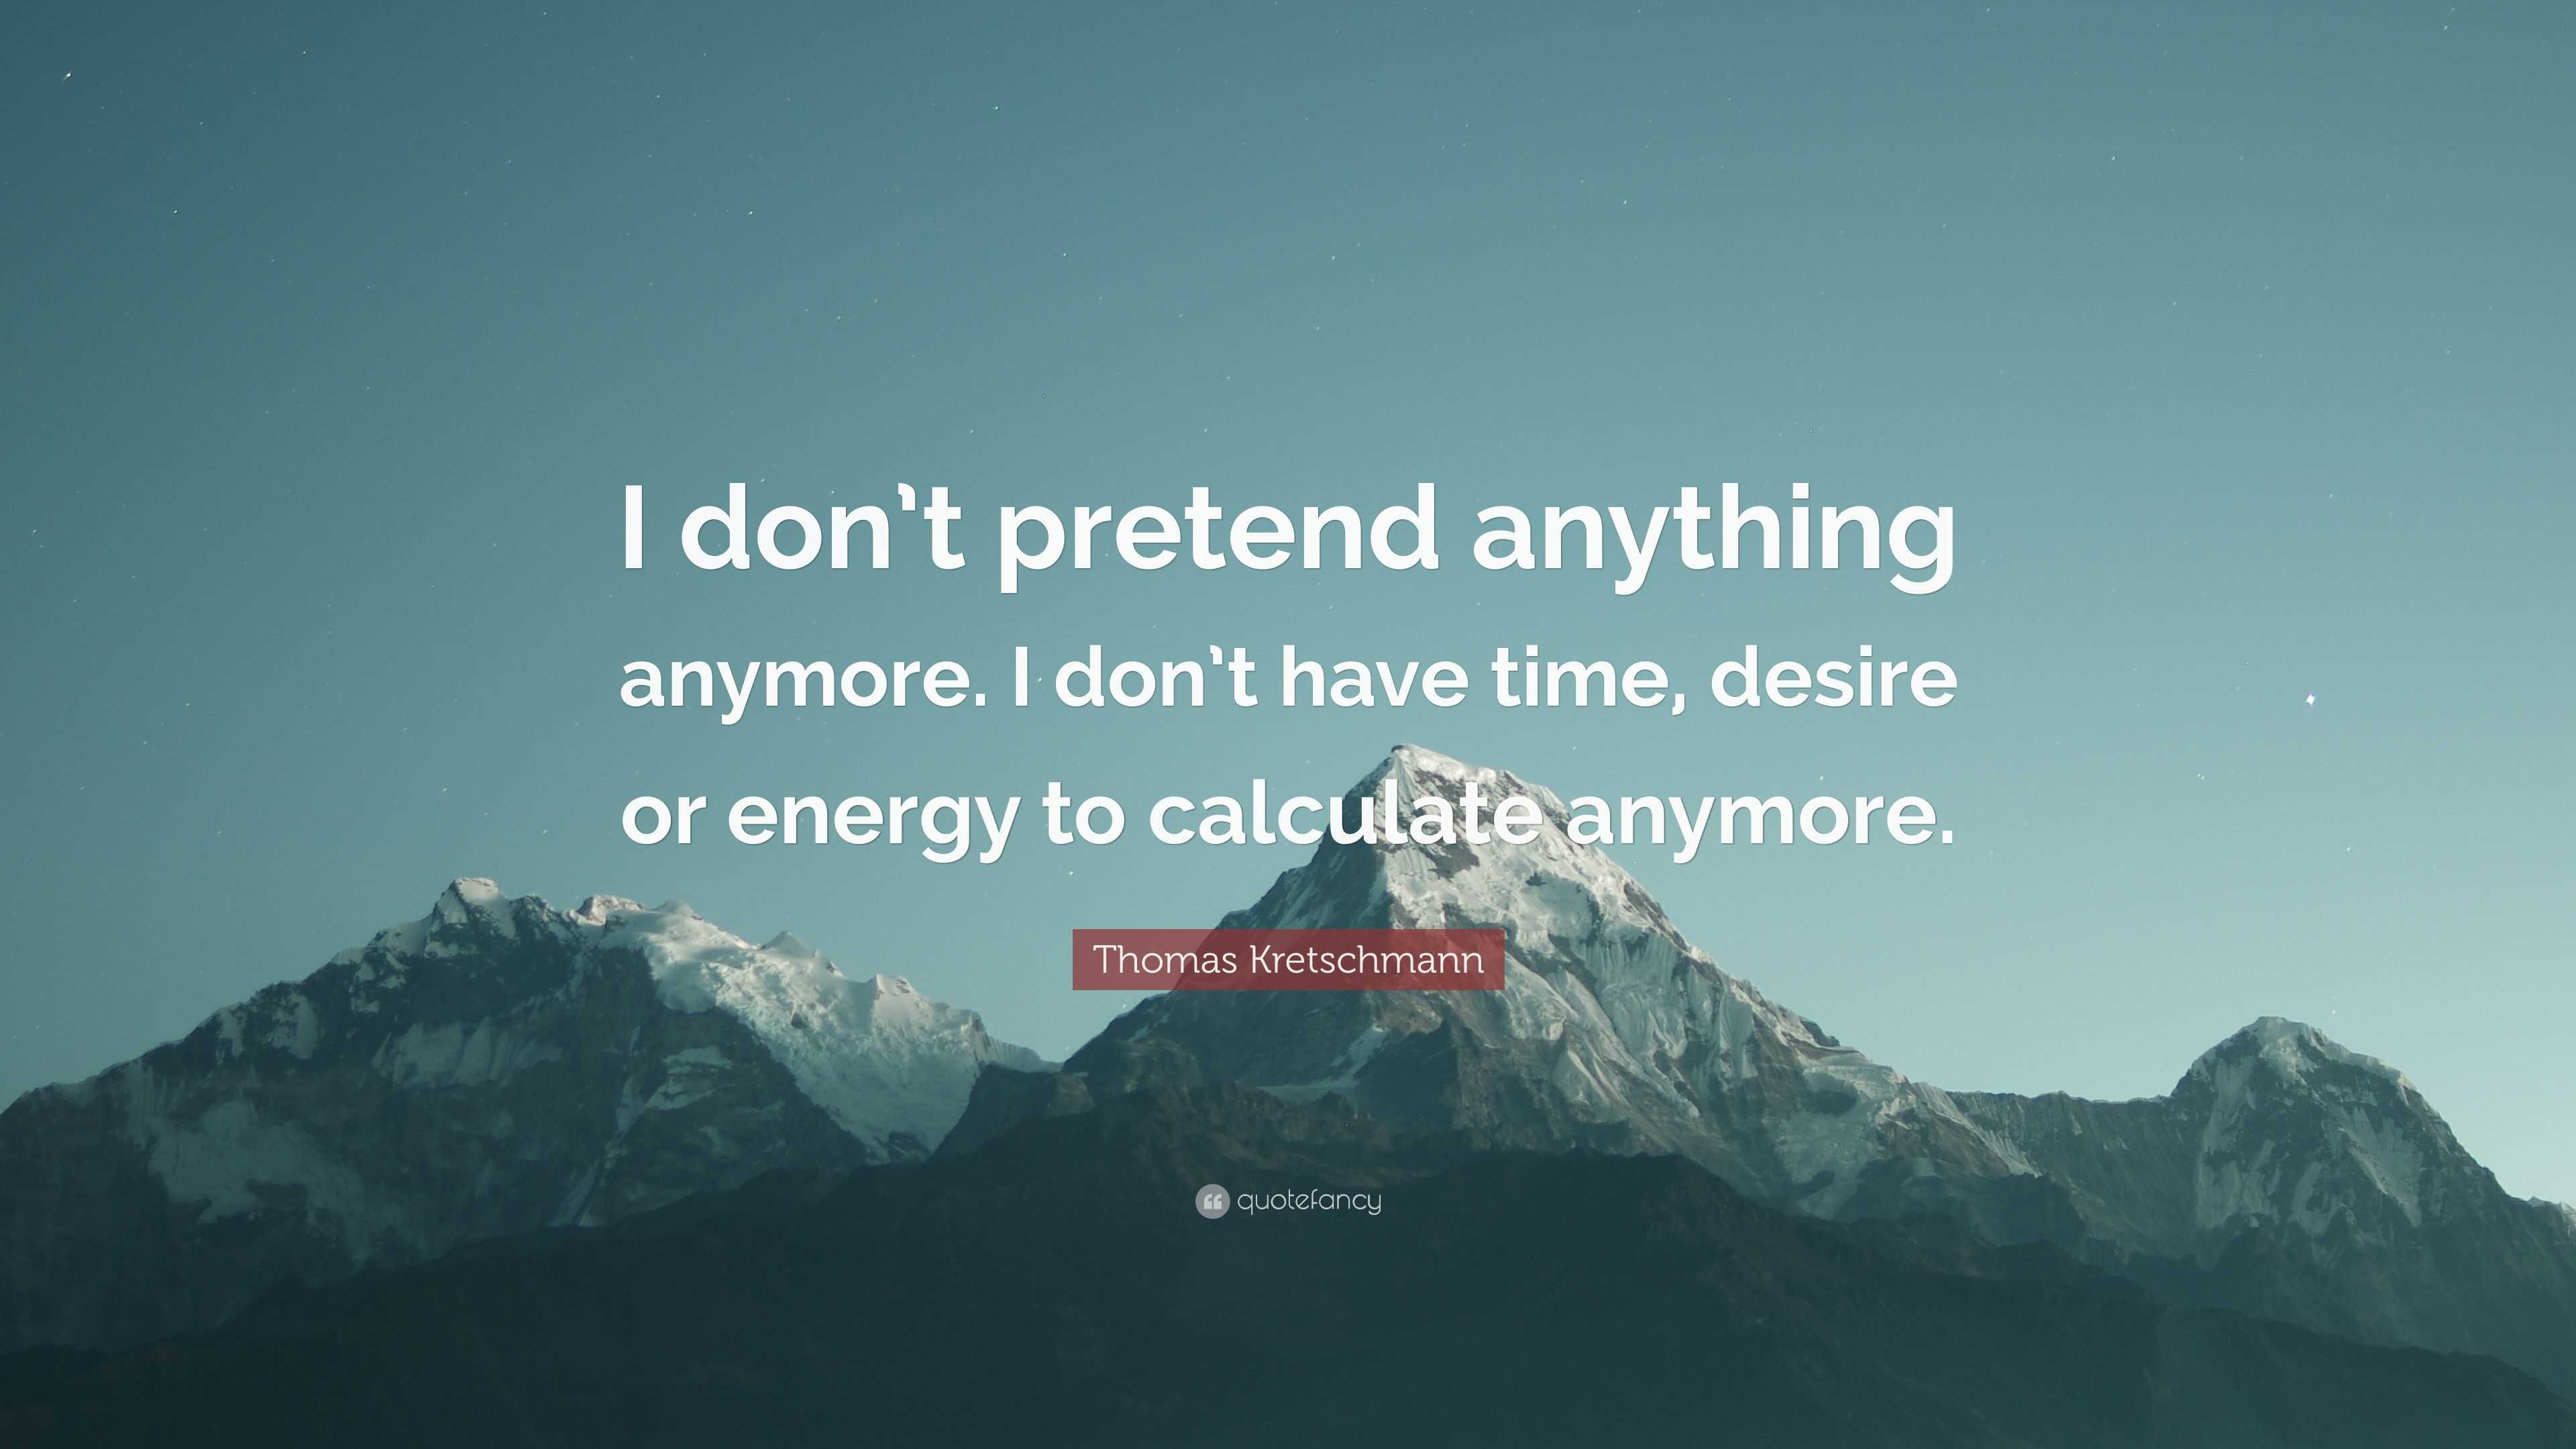 Thomas Kretschmann Quote: “I Don't Pretend Anything Anymore. I Don't Have Time, Desire Or